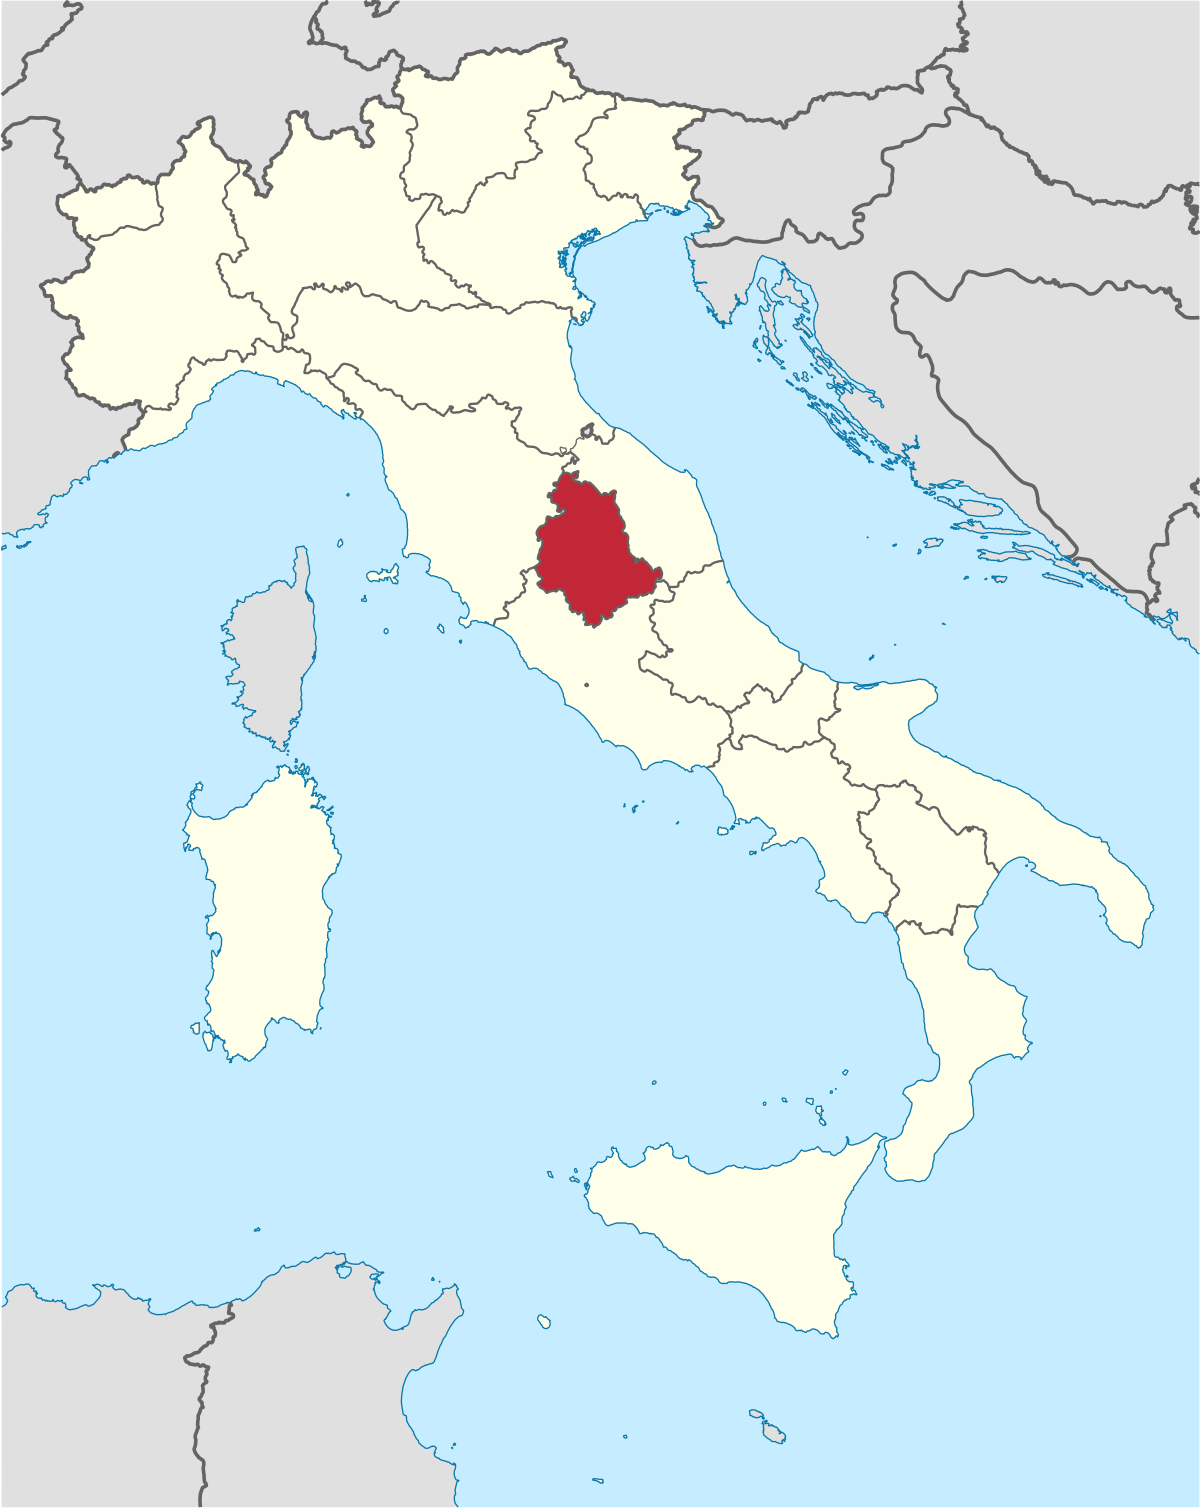 Image result for umbria ON MAP OF ITALY